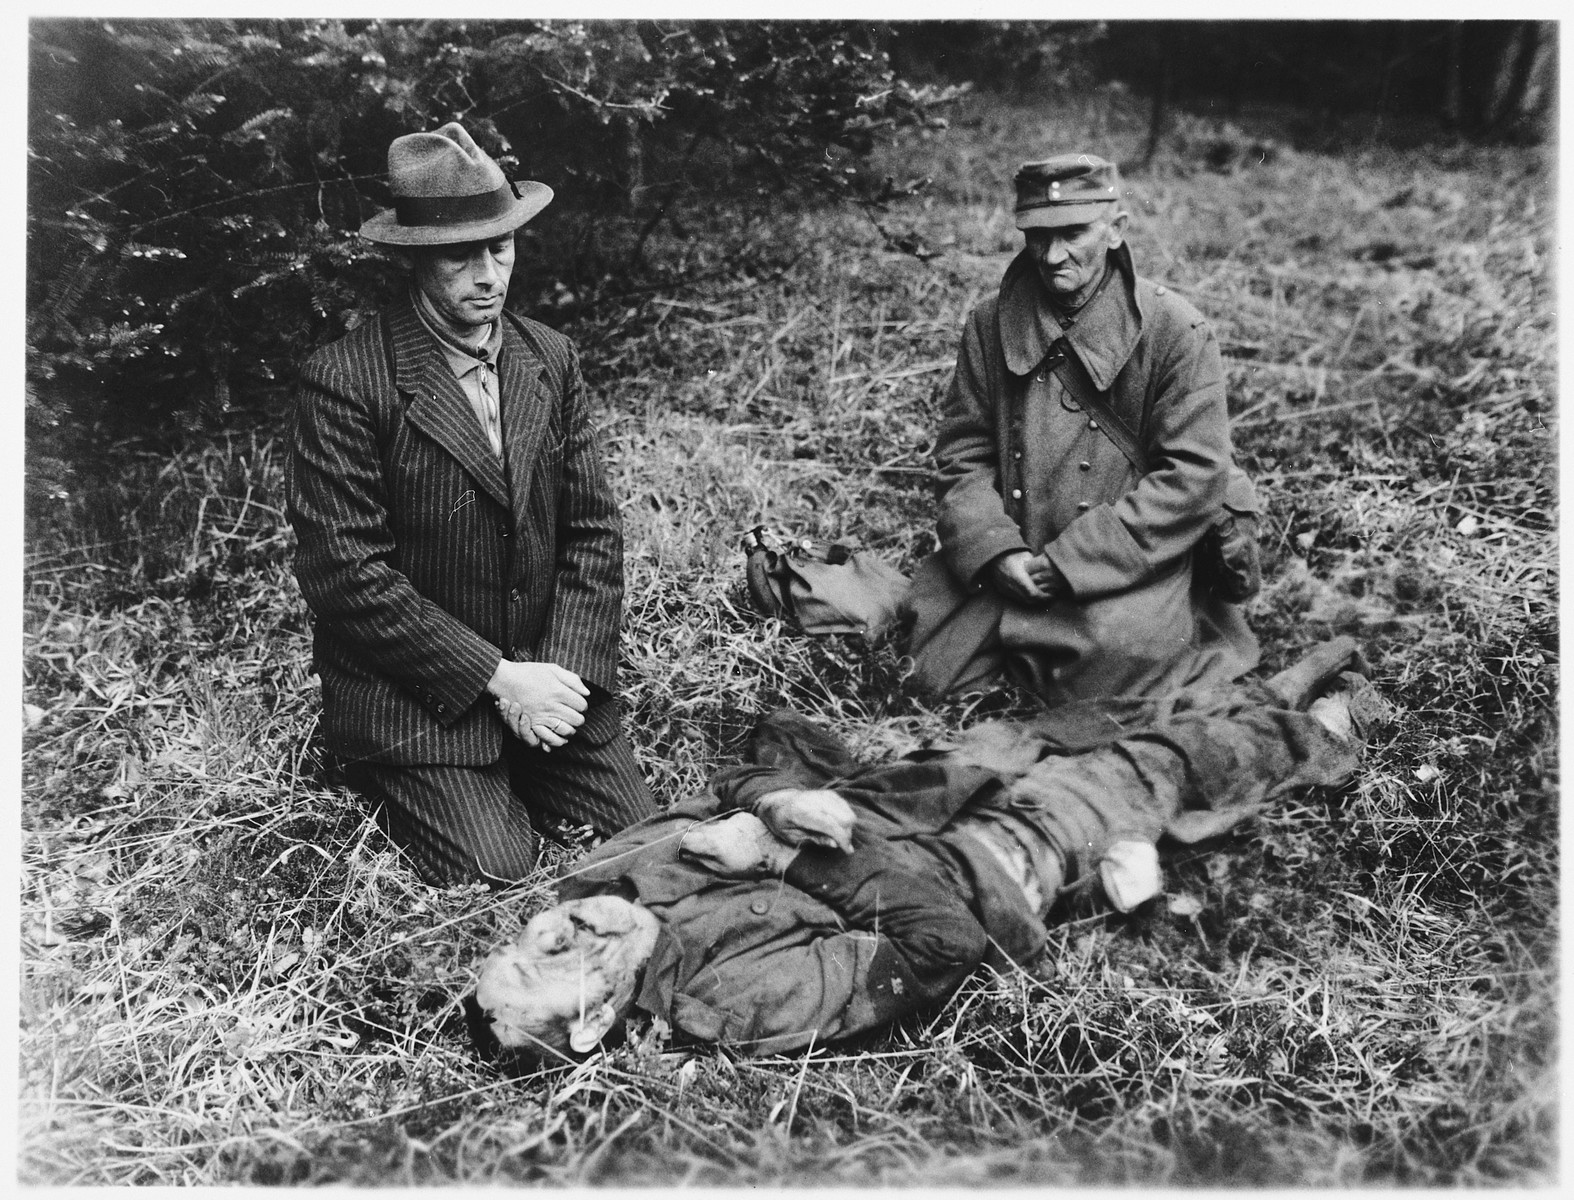 A Nazi party member from Hals and a German prison guard kneel beside the body of a Russian slave laborer who was killed by SS troops near Tiefenbach, near Passau. 

They were forced to view the atrocity by U.S. Third Army troops.  The victim was one of 100 Russians interned in a barn in Oberjacking, a small village near Tiefenbach.